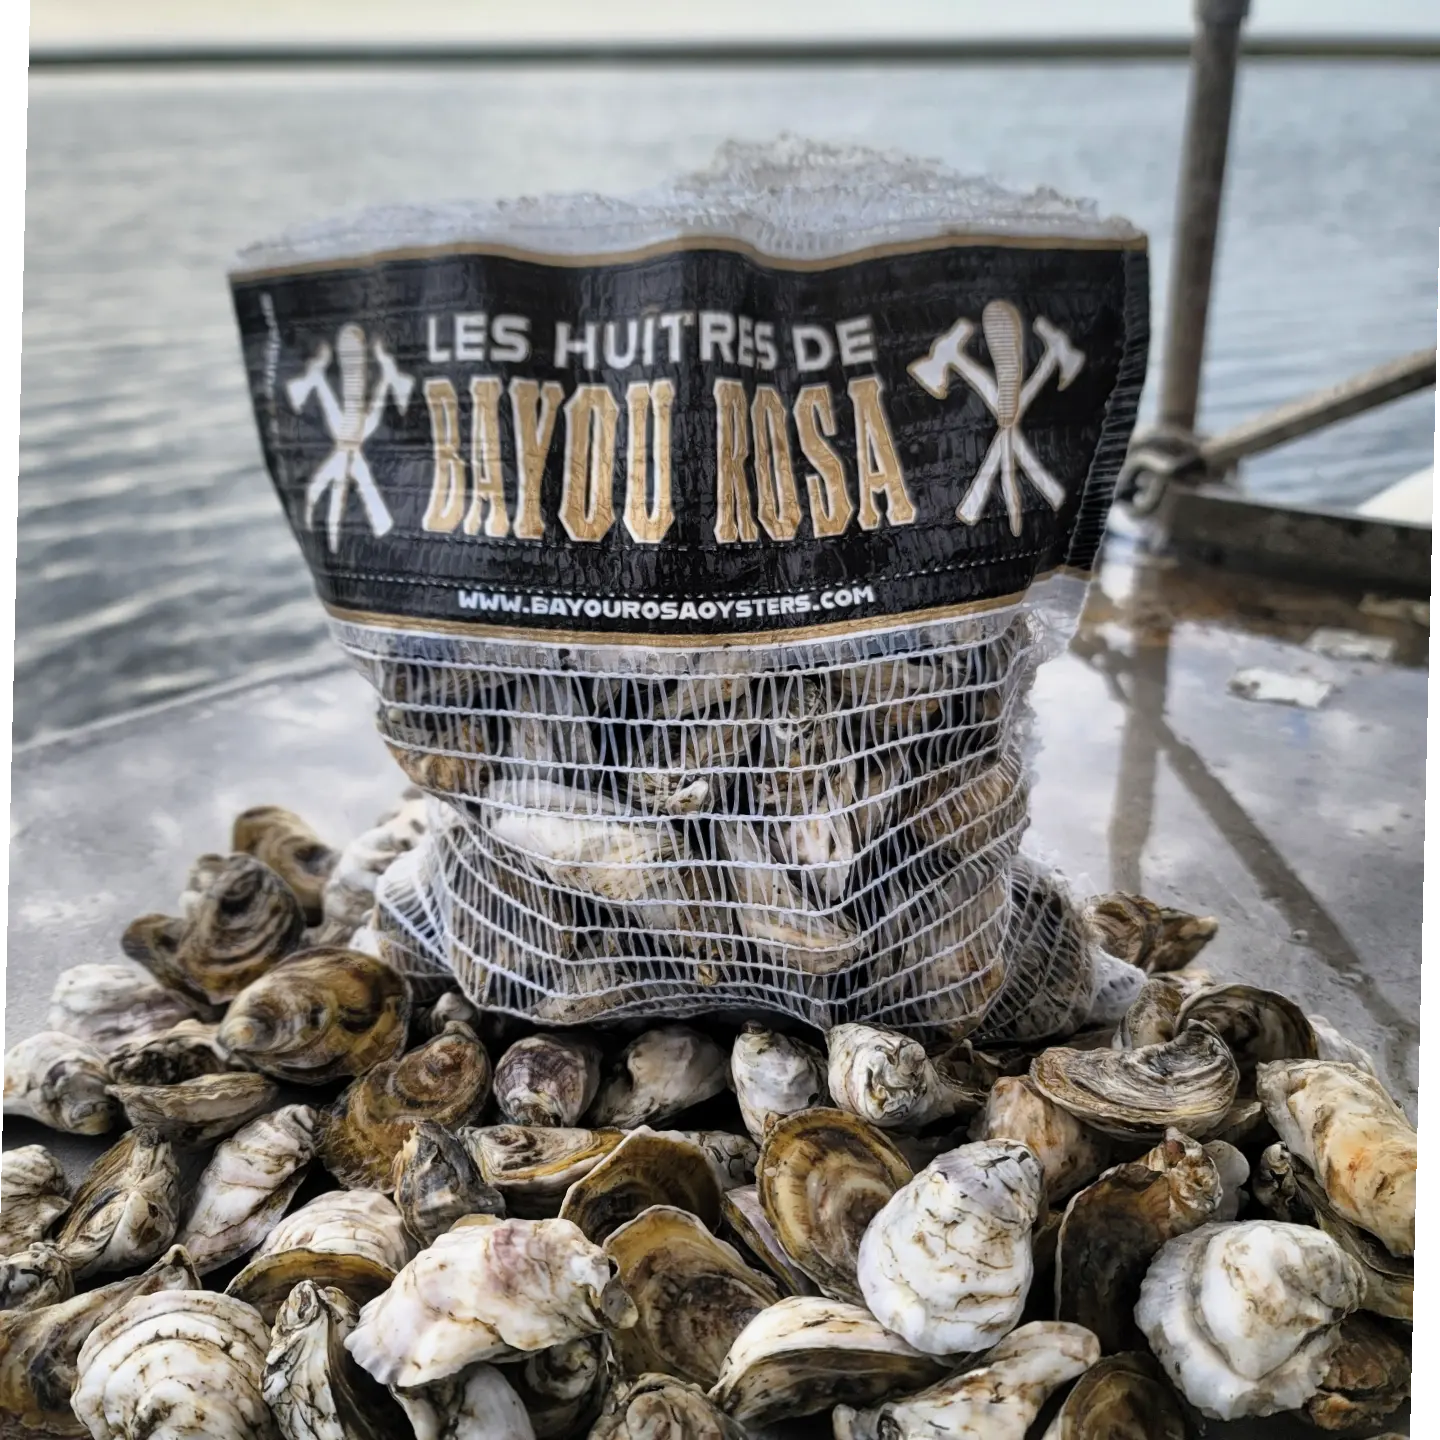 50 Oysters DELIVERED December 22nd to New Orleans Area (See PARISHES in Description)